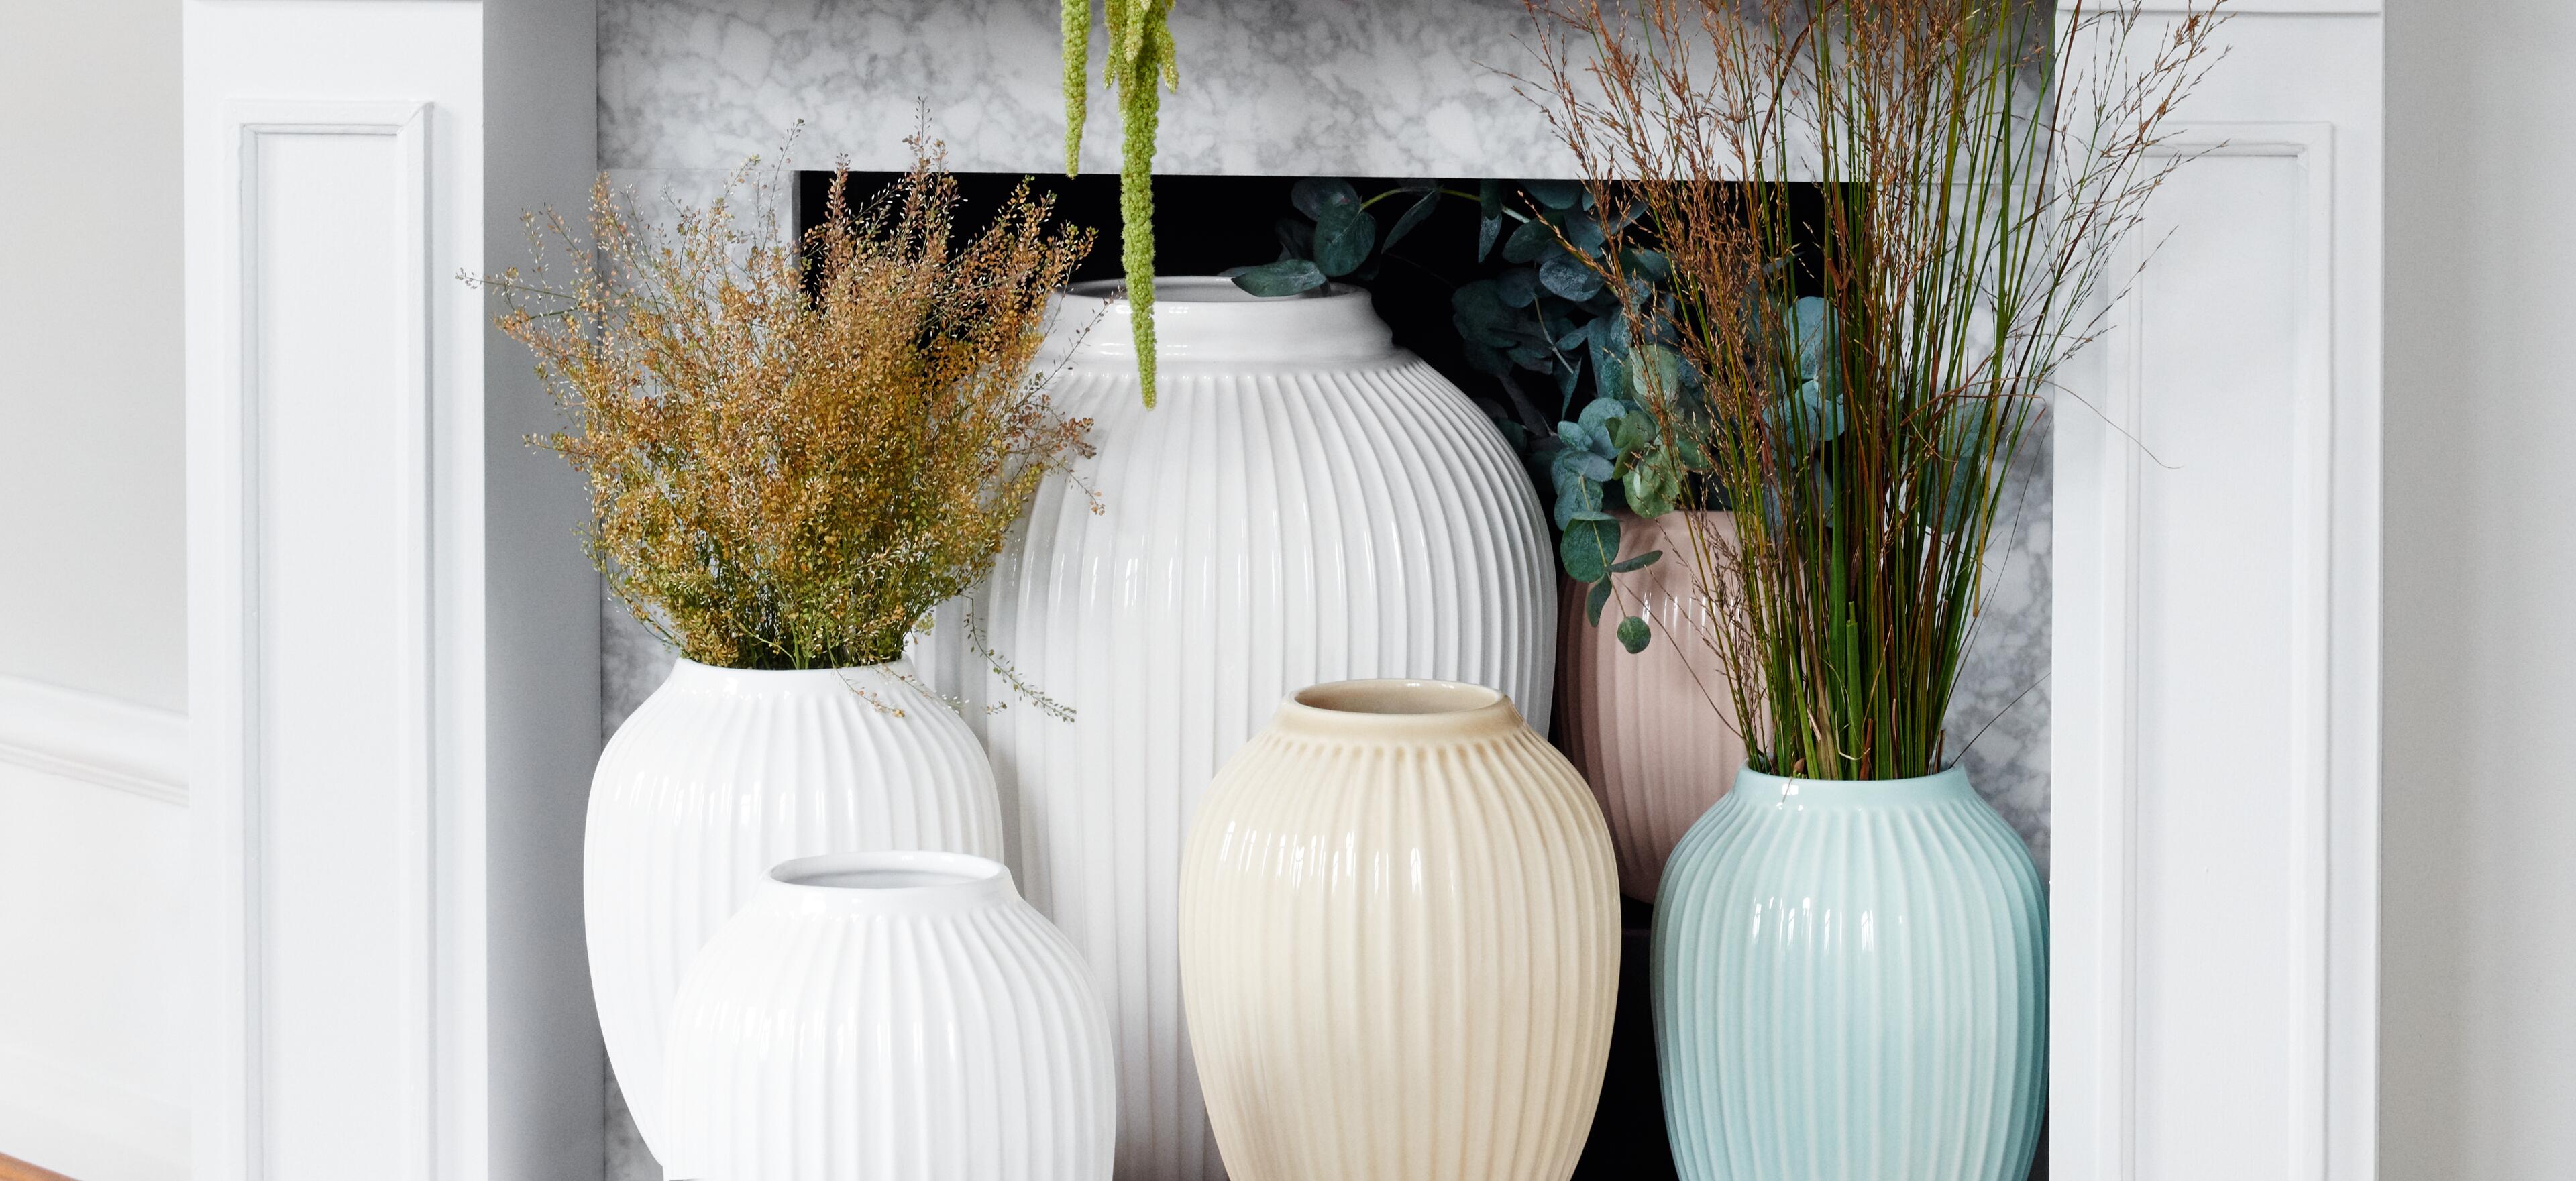 Kähler Hammershøi vase in fluted porcelain. Floor vases, table vases and other vases in different sizes and colors. Yellow, blue, pink vase.